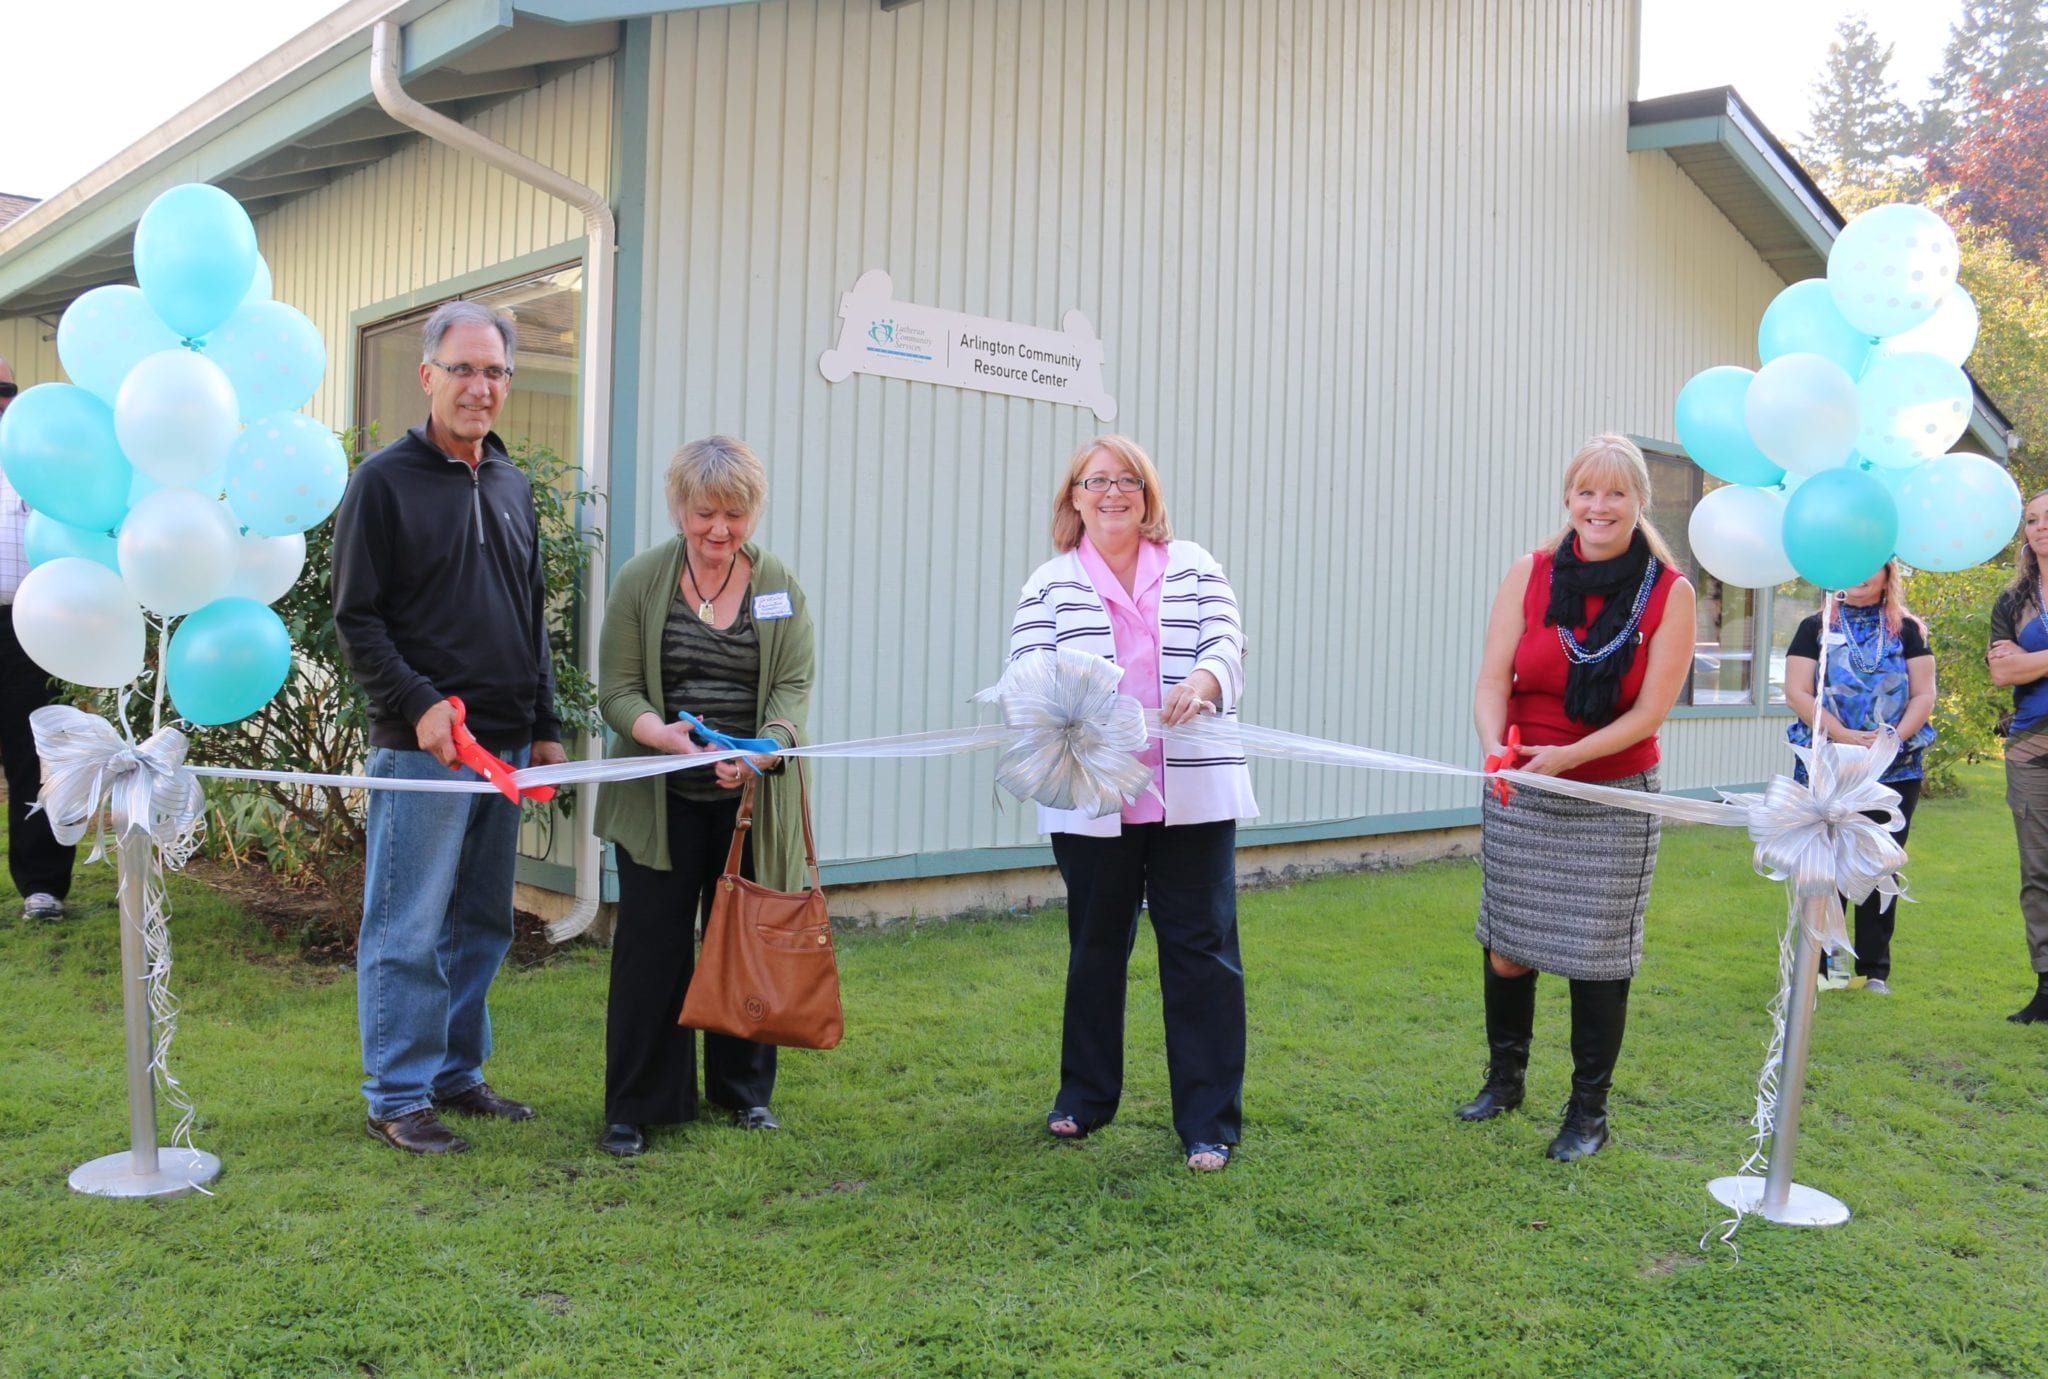 The ribbon cutting ceremony included Bill Tsoukalis (Executive Director of the Boys and Girls Club, Snohomish County), Jo Olson (Executive Director of the Stillaguamish Senior Center), Mayor Barbara Tolbert and LCSNW Family Support Center Director Crisann Brooks.